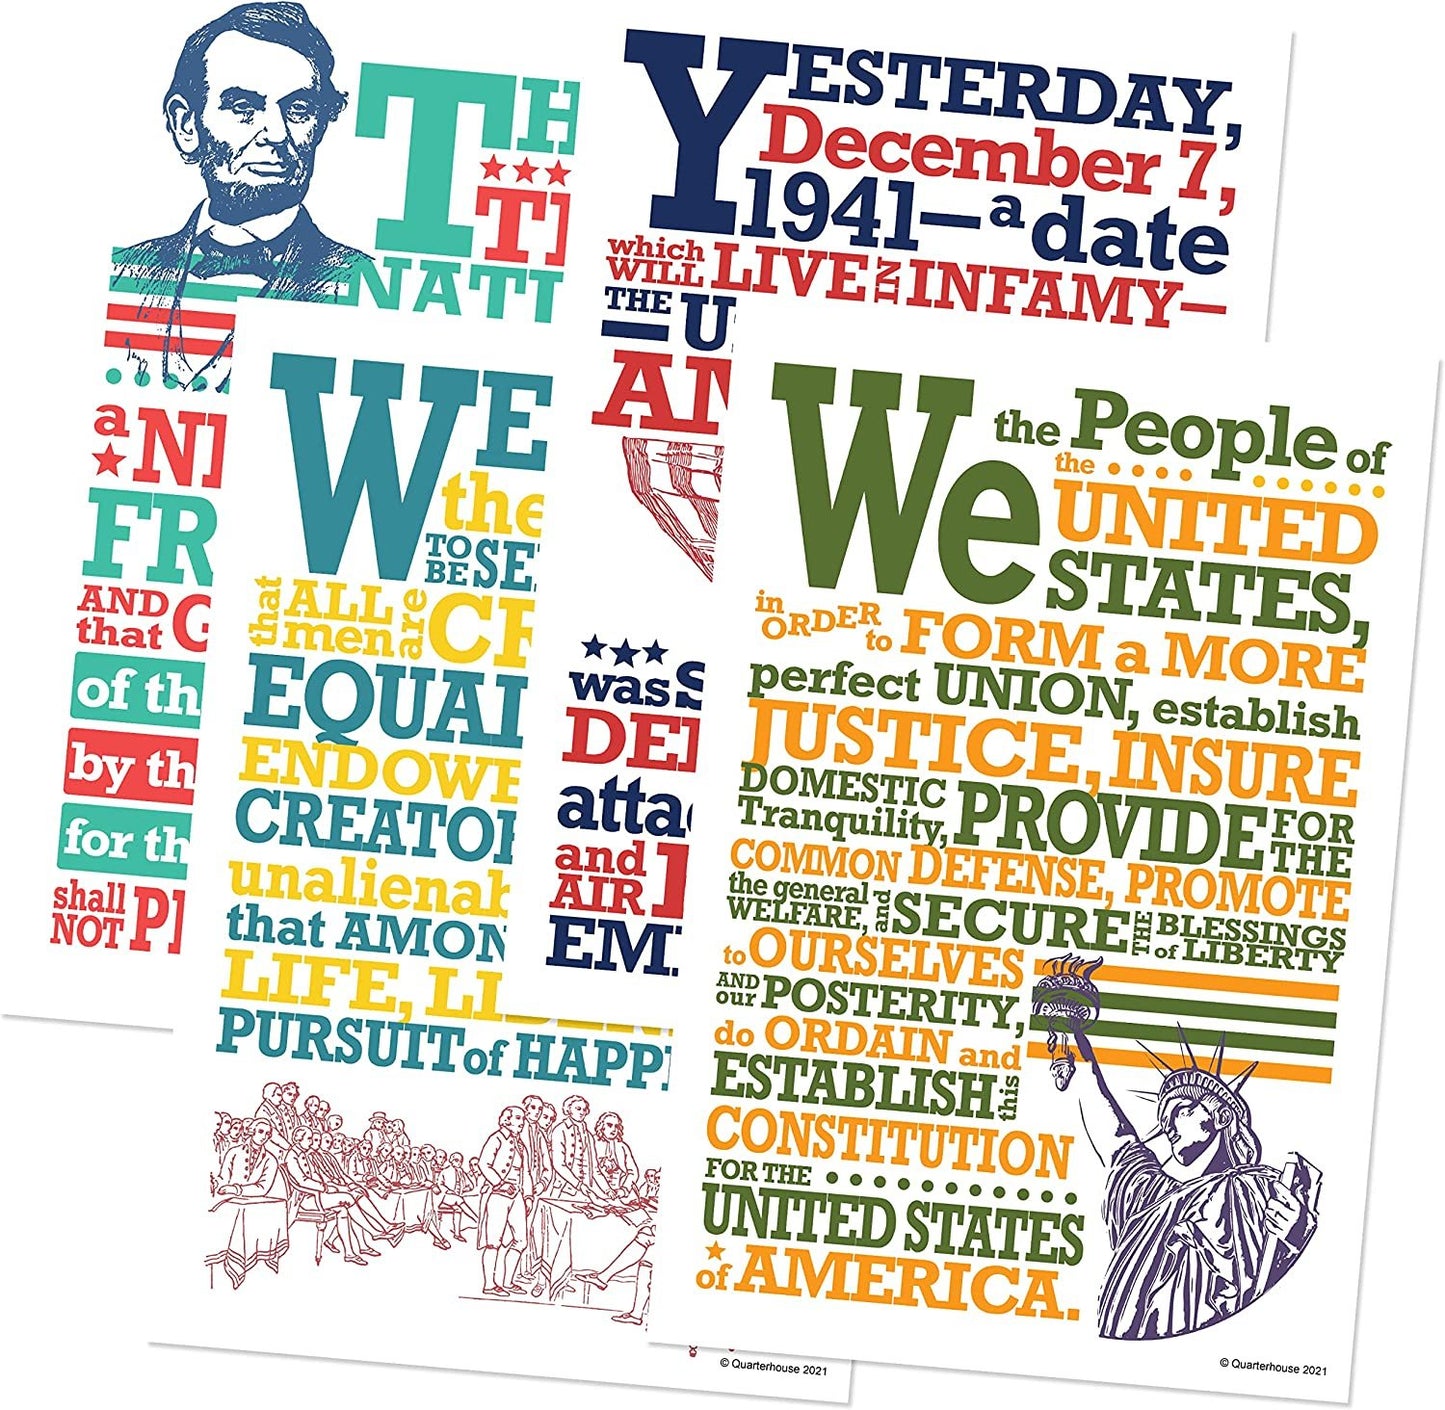 Quarterhouse Famous Speeches and Declarations from U.S. History Poster Set, Social Studies Classroom Learning Materials for K-12 Students and Teachers, Set of 4, 12 x 18 Inches, Extra Durable